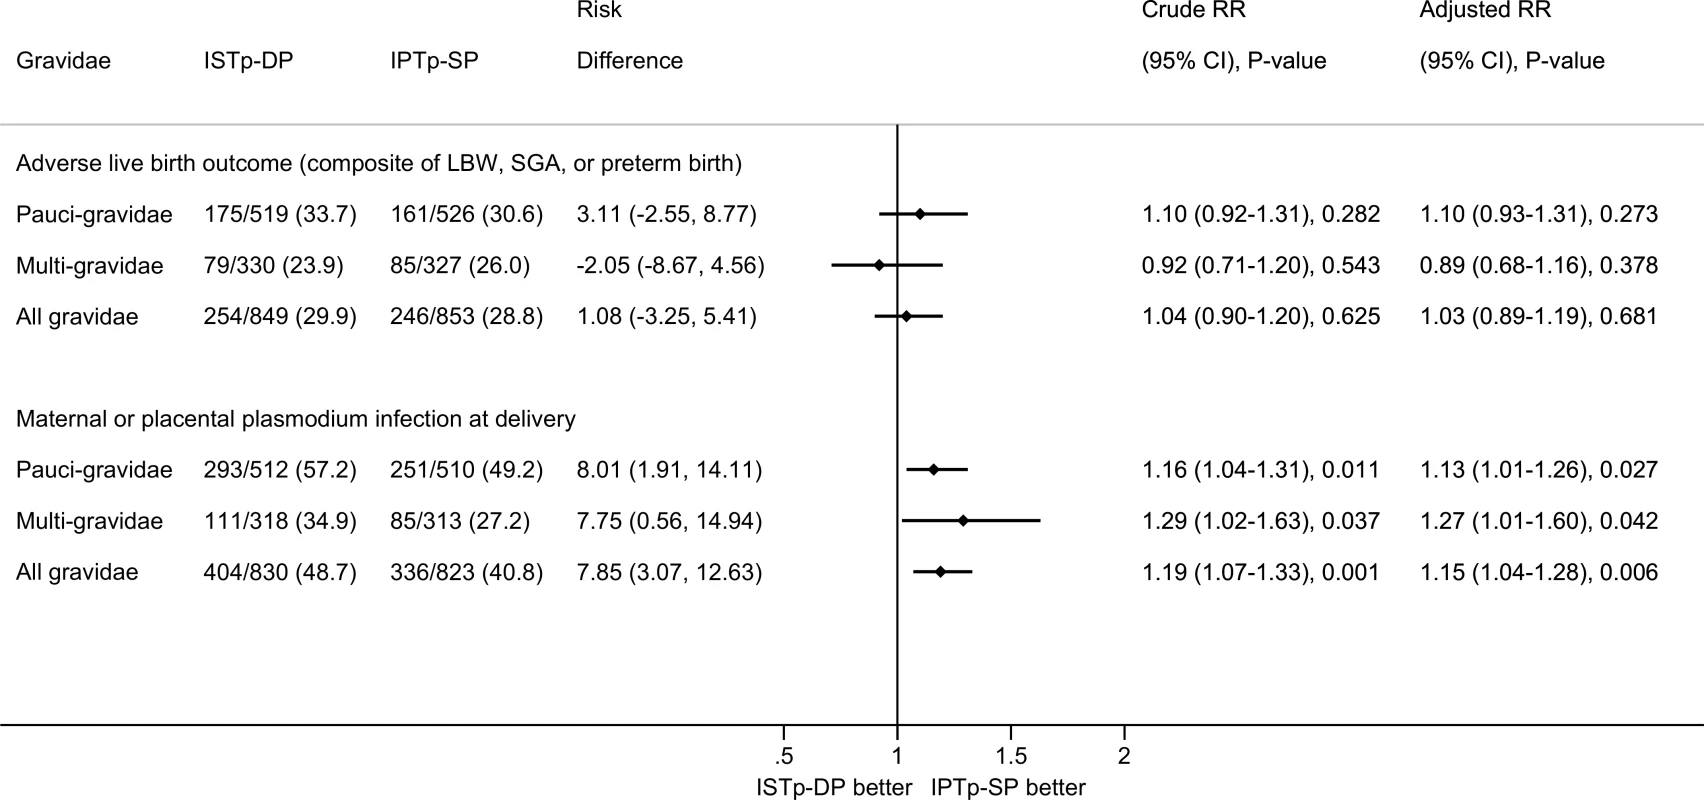 Efficacy of ISTp-DP versus IPTp-SP on the primary outcomes of adverse live birth outcome and maternal or placental plasmodium infection at delivery (any measure).